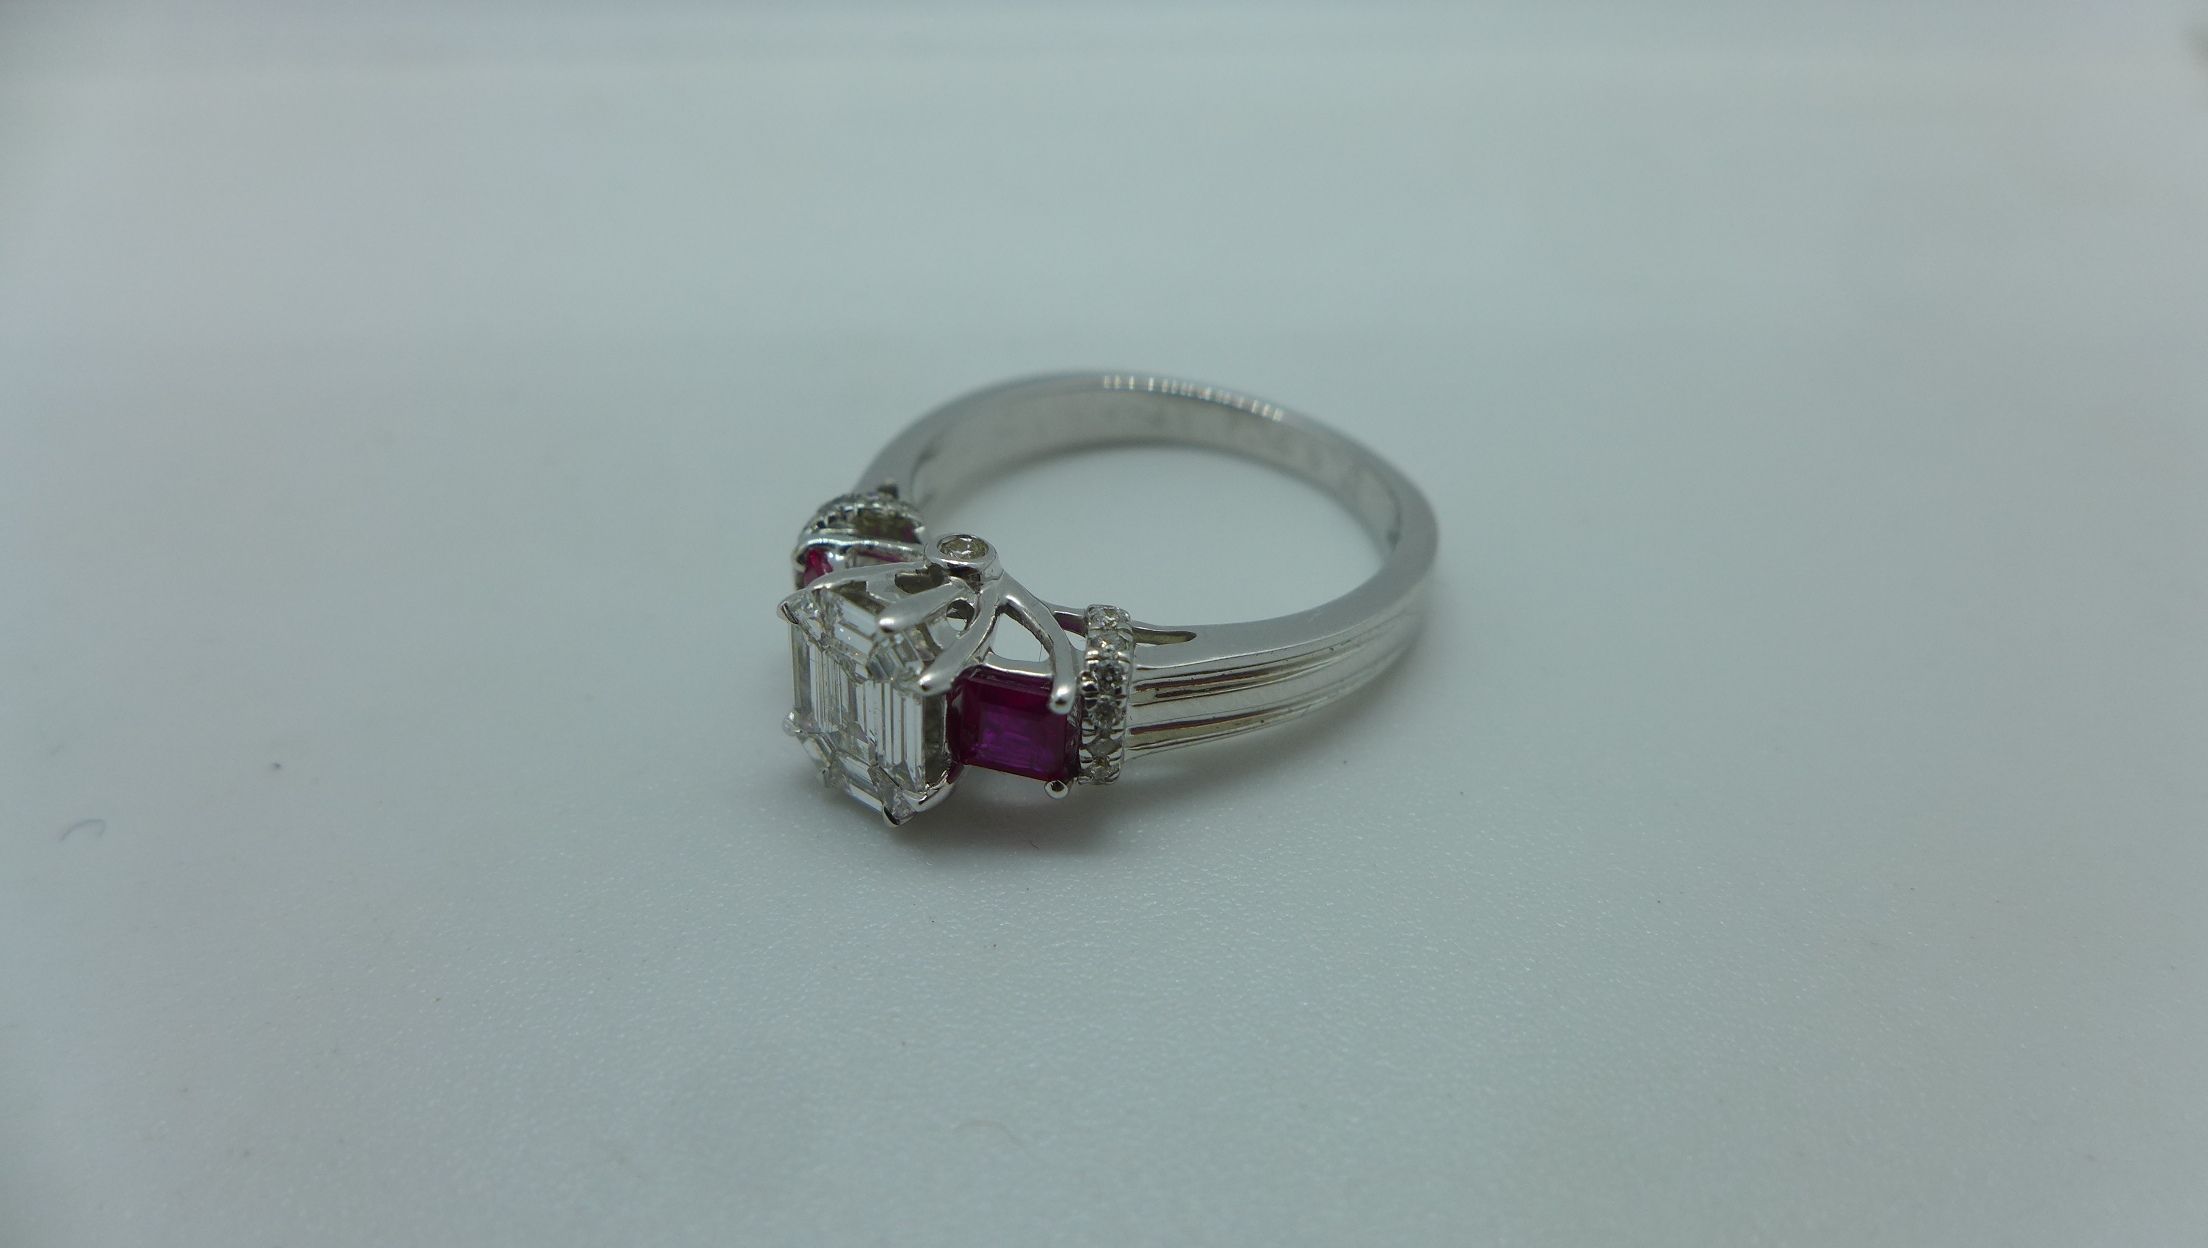 An 18ct white gold diamond and ruby ring with a centre 9 piece diamond, emerald cut measuring 7mm - Image 2 of 4